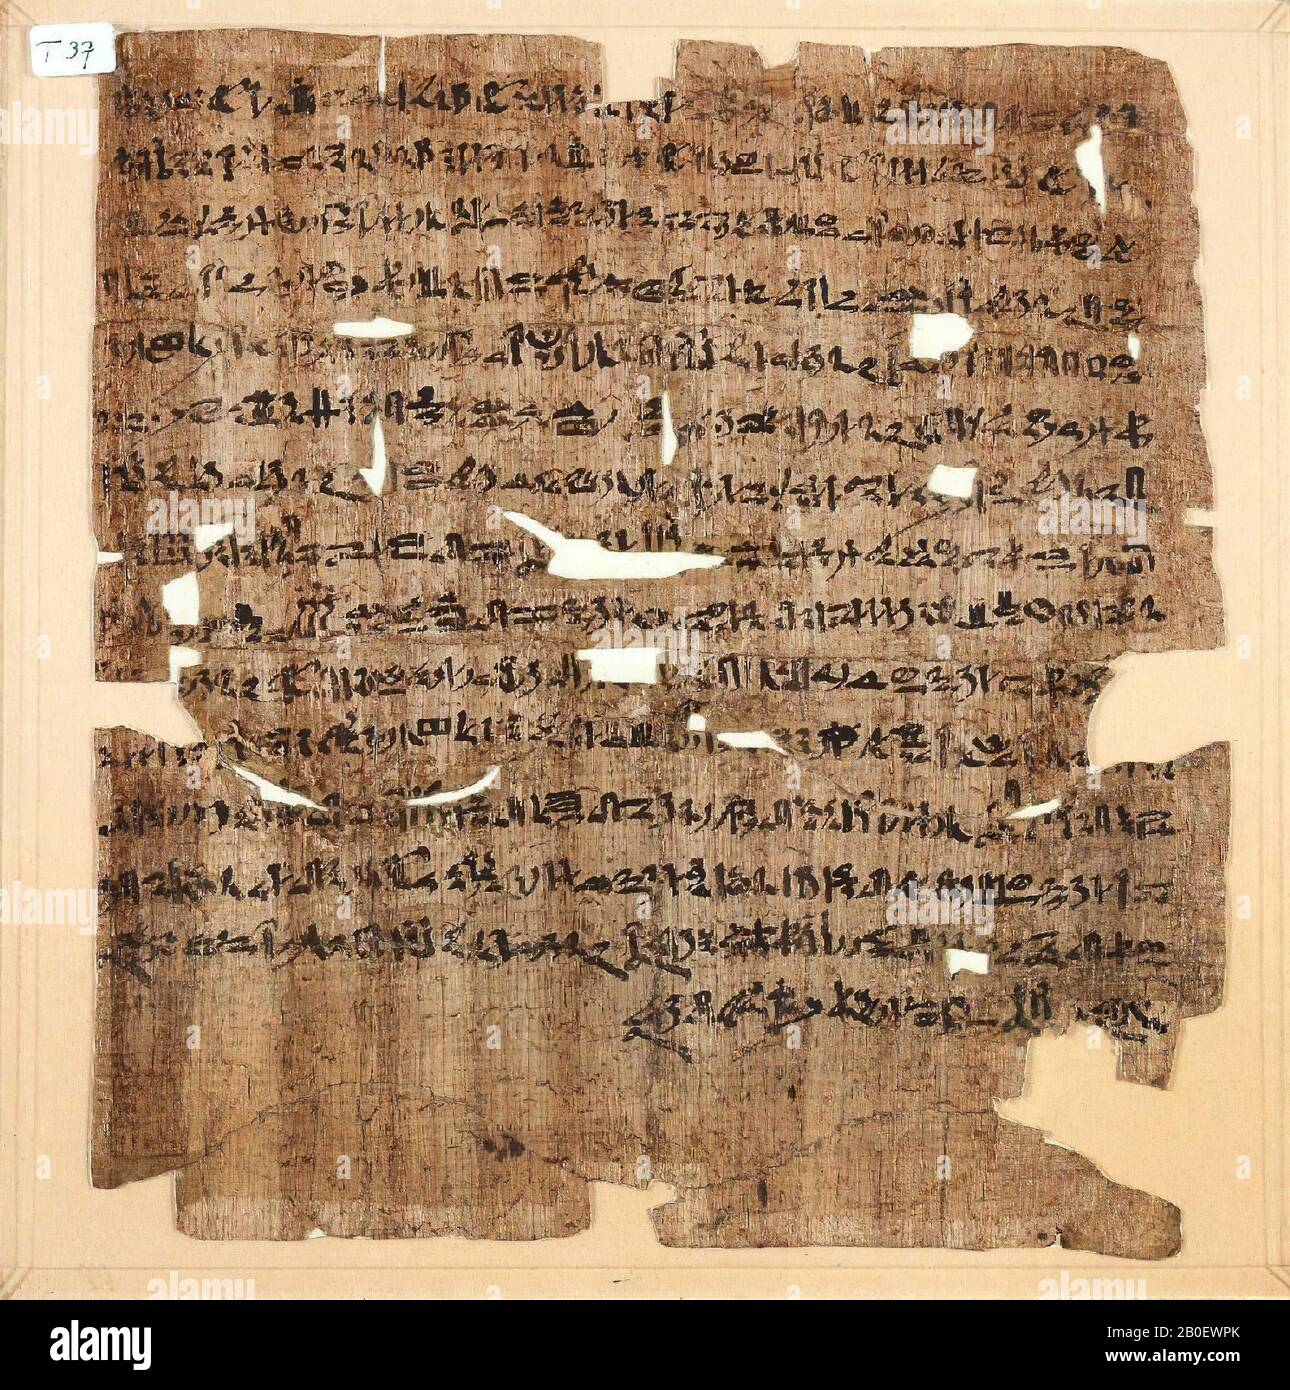 death book, Asty (?), A: Method of framing: glued on white paper and cardboard behind single glass, B: Classification, 1. Number of columns: 1 column of 15 lines, no rubrum, no damage in 3, 4 and 13, 2. Scripture: hieratic, 3. Color ink: black, 4. Reading direction: right to left, 5. Number of vignettes none, 6. Color: -, C: Description, Text :, DB 166, handwriting, hieratic , papyrus, 23 x 22 cm, glass size 25 x 25 cm, Third Intermediate Period, 22nd Dynasty or later, Egypt Stock Photo